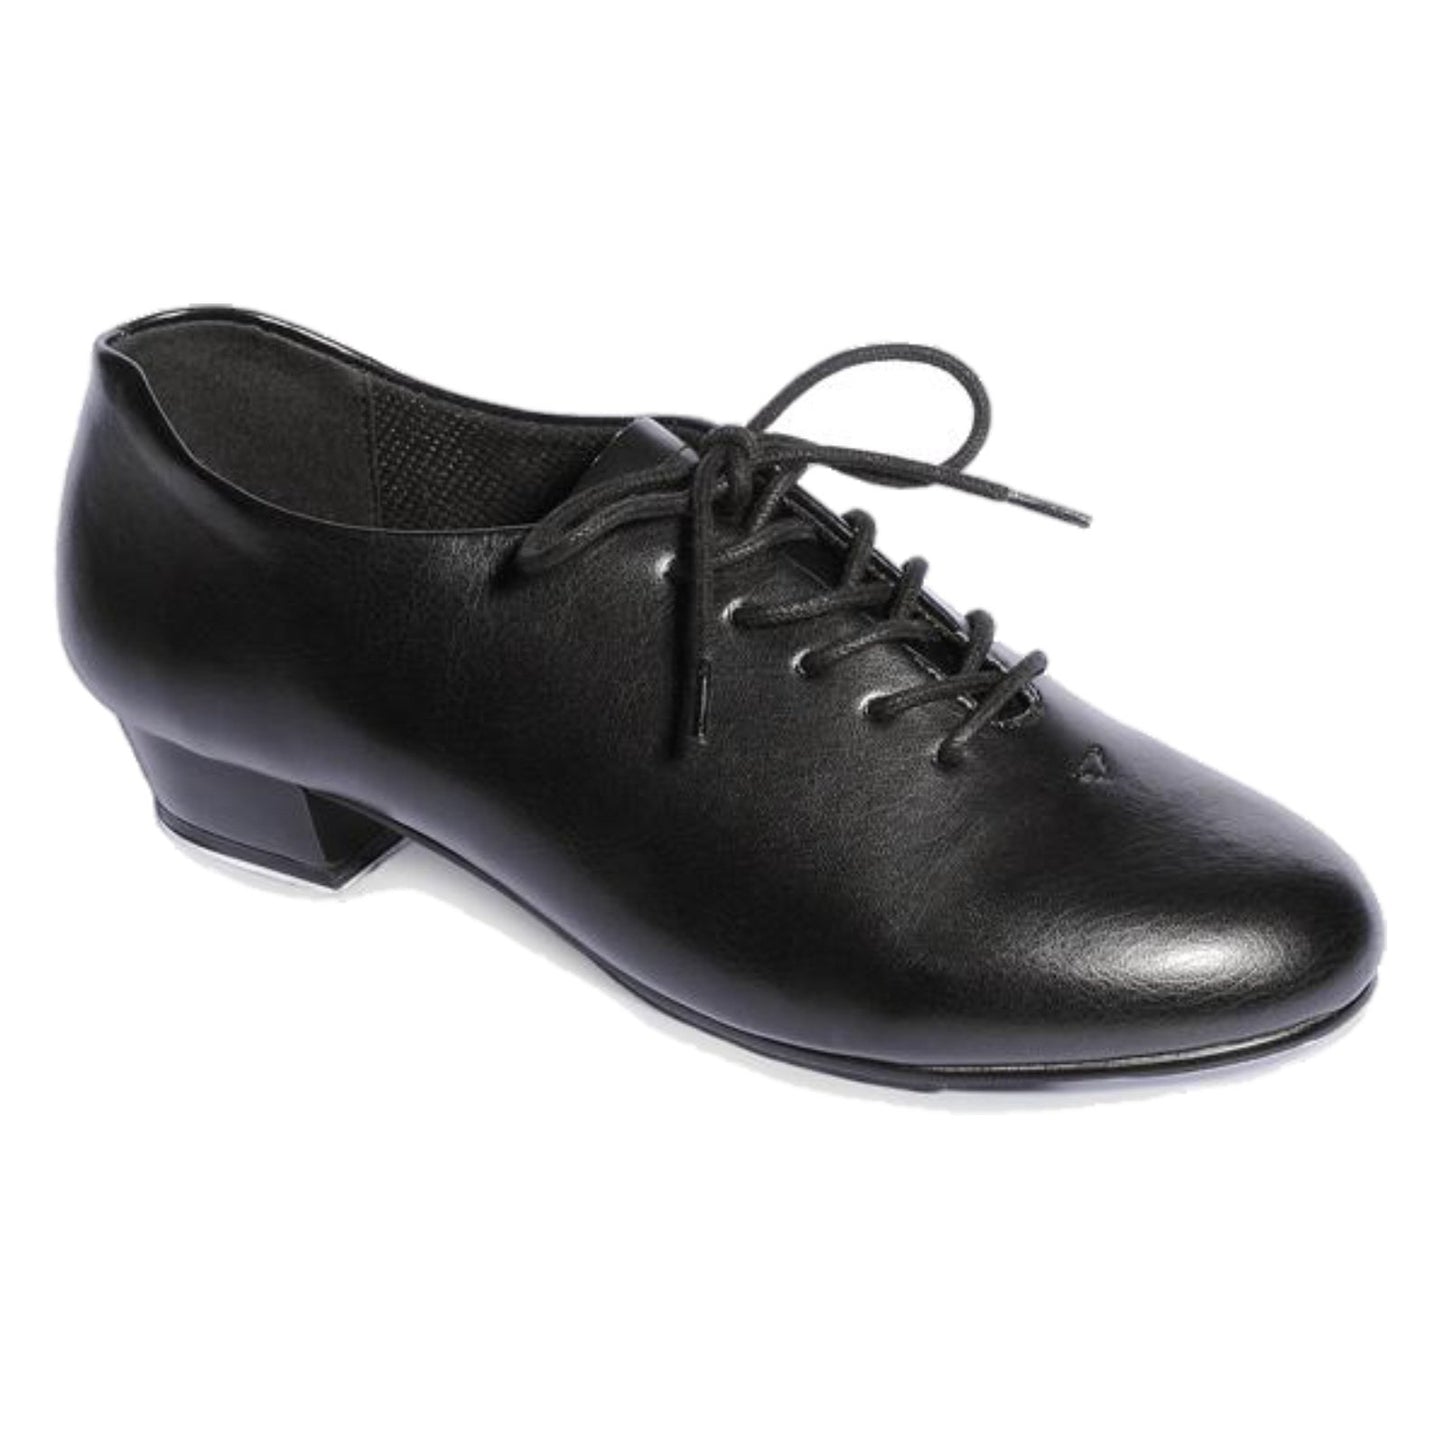 UNISEX BLACK LEATHER LOOK OXFORD TAP SHOES WITH HEEL AND TOE TAPS Dance Shoes Roch Valley 